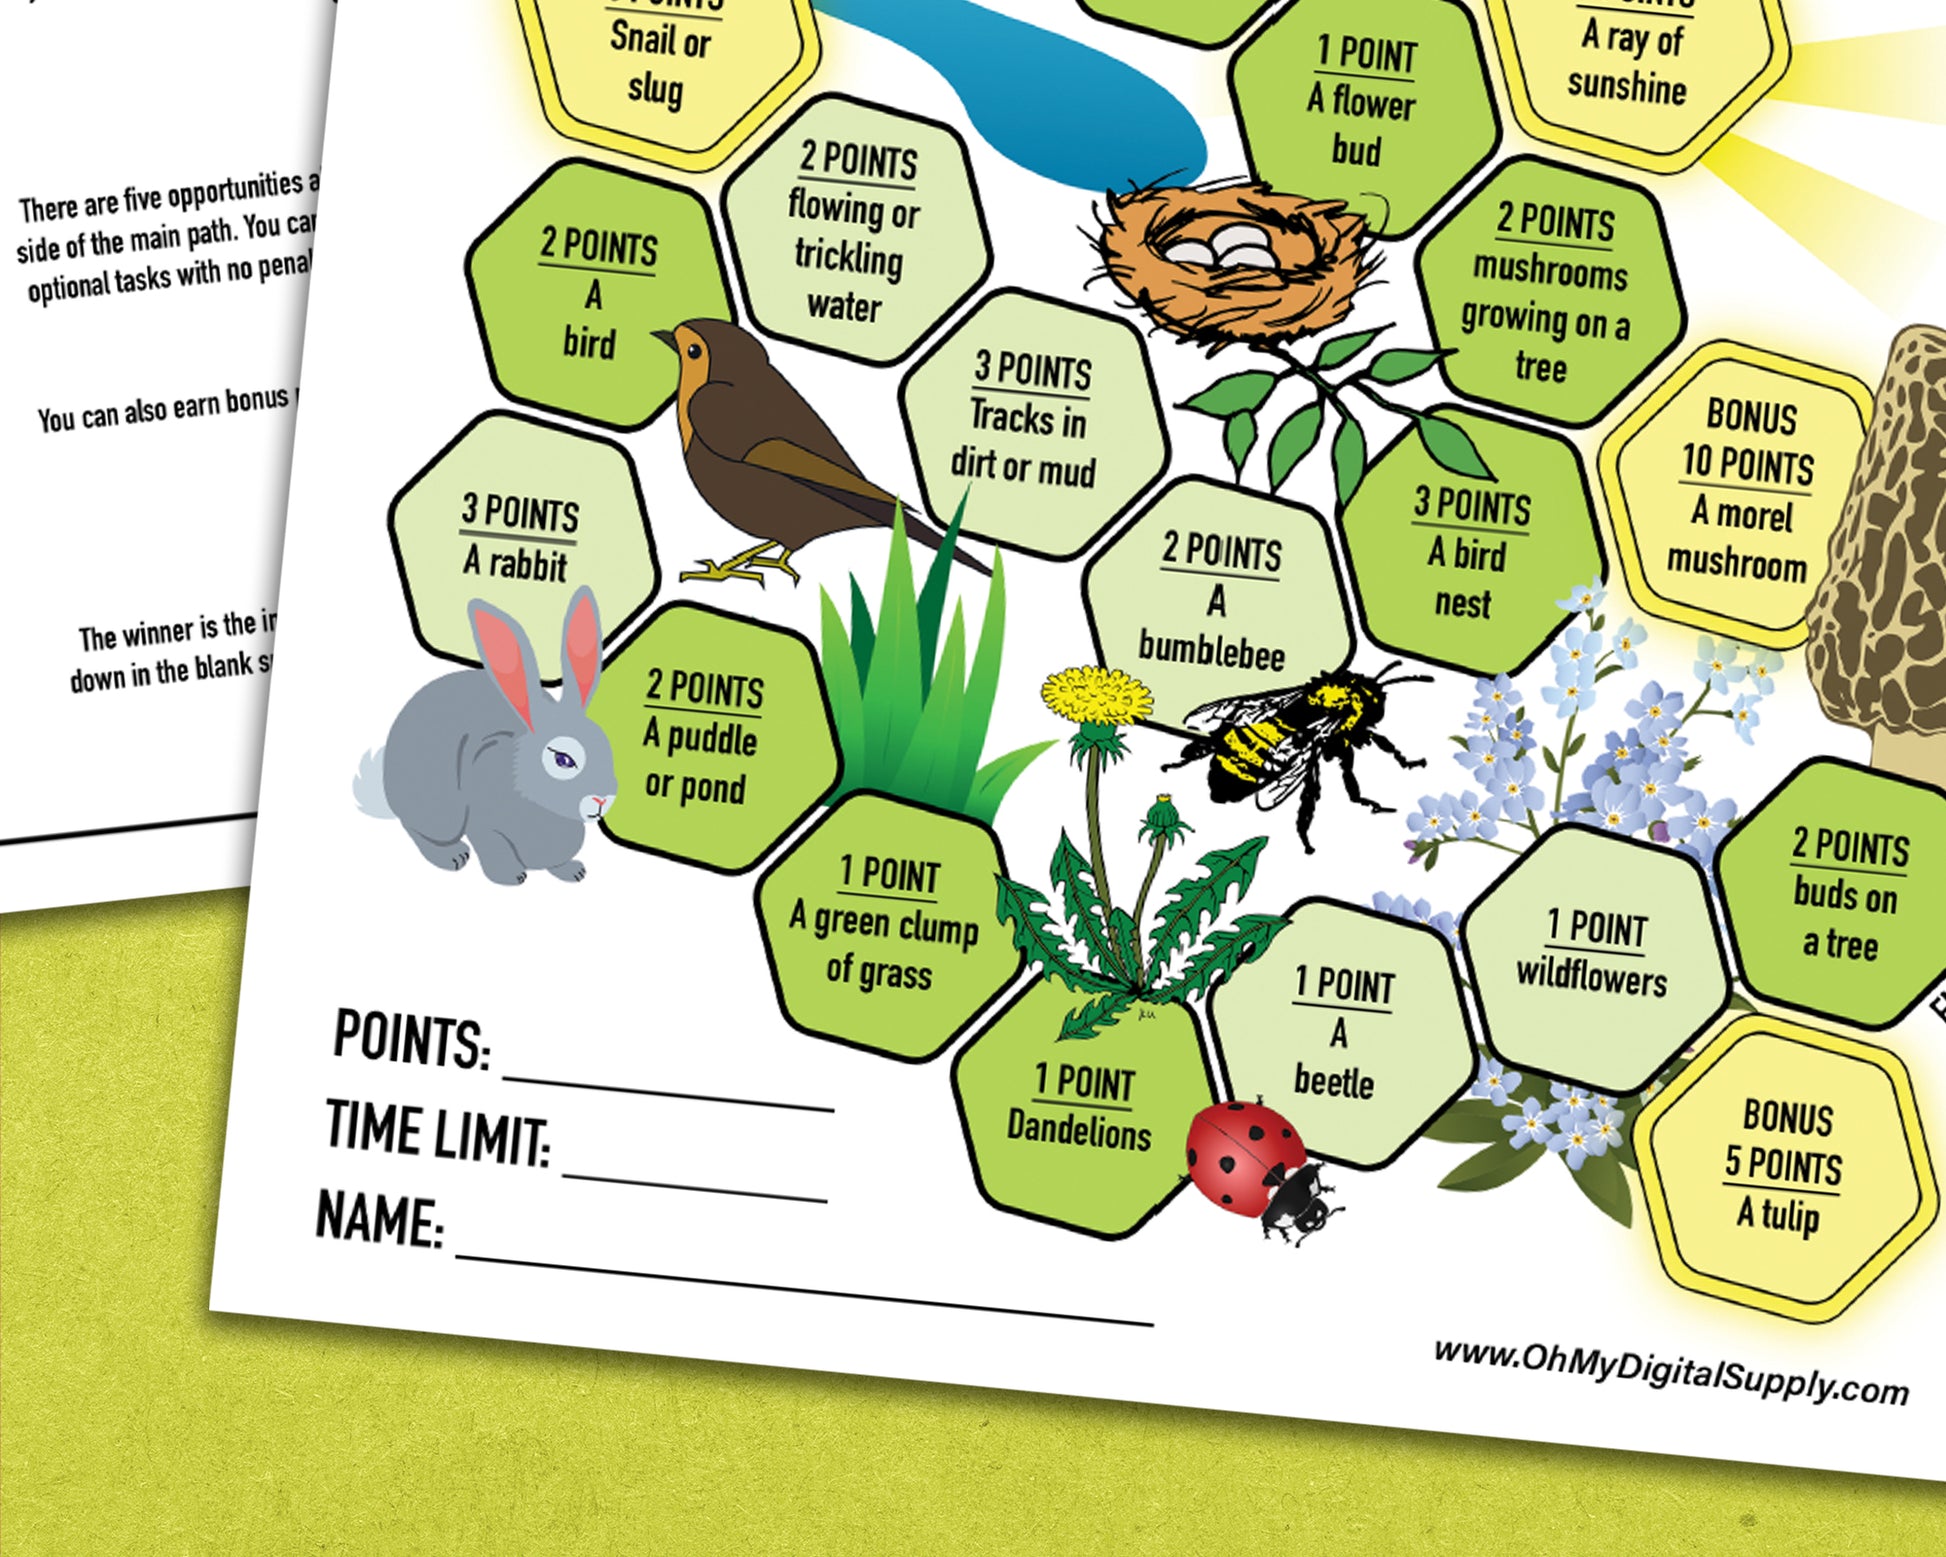 A printable nature trek outdoor spring scavenger hunt competitive team building activity. The worksheet looks like a game board where each spot on the board has an item you need to find to earn points and advance along the path.